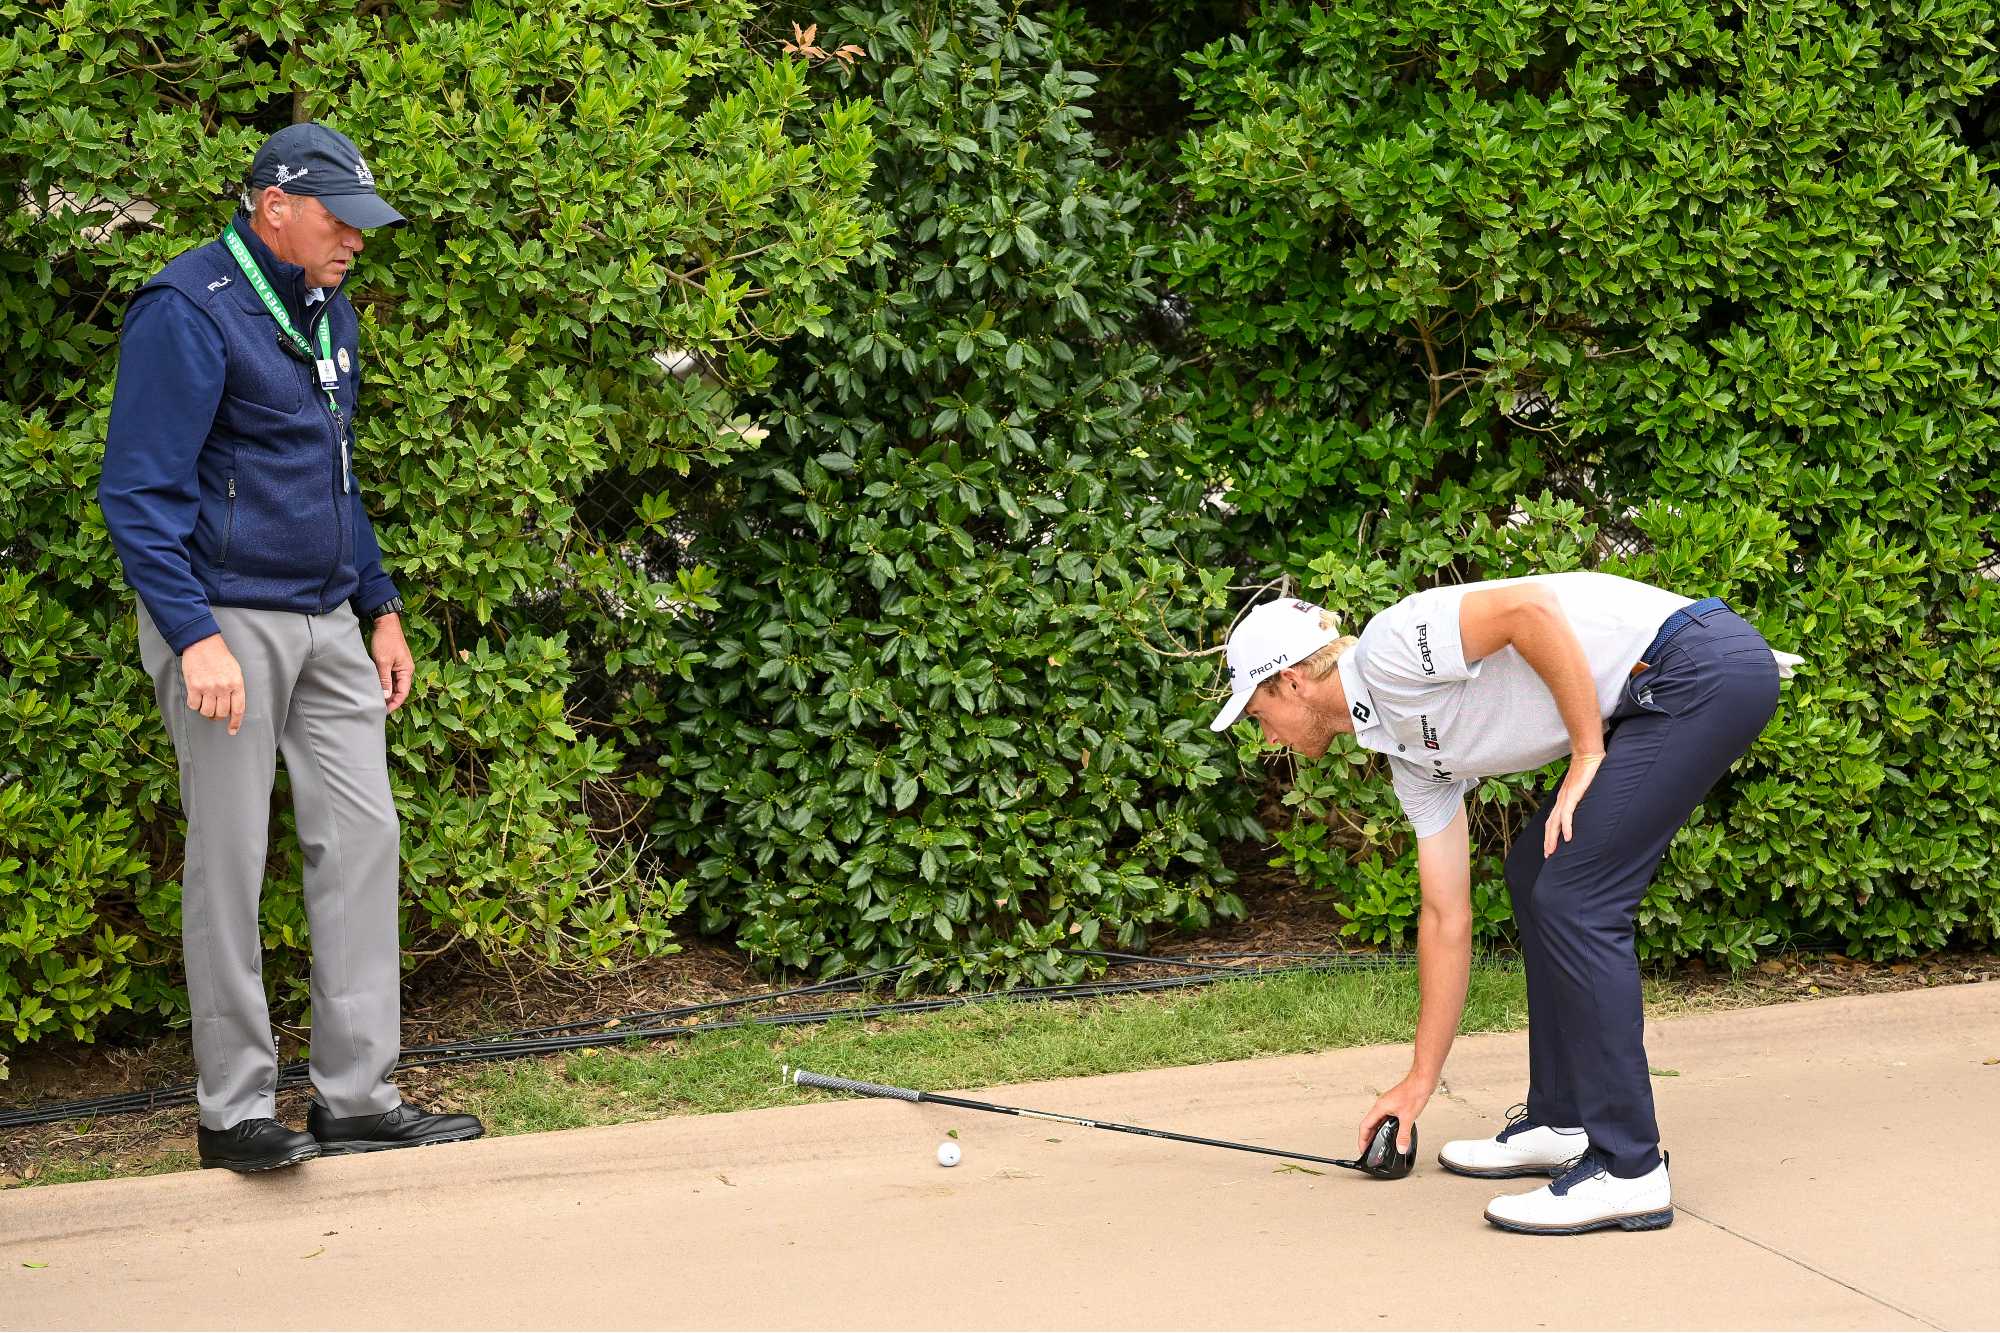 How the rules helped Zalatoris post the craziest bogey you’ll ever see